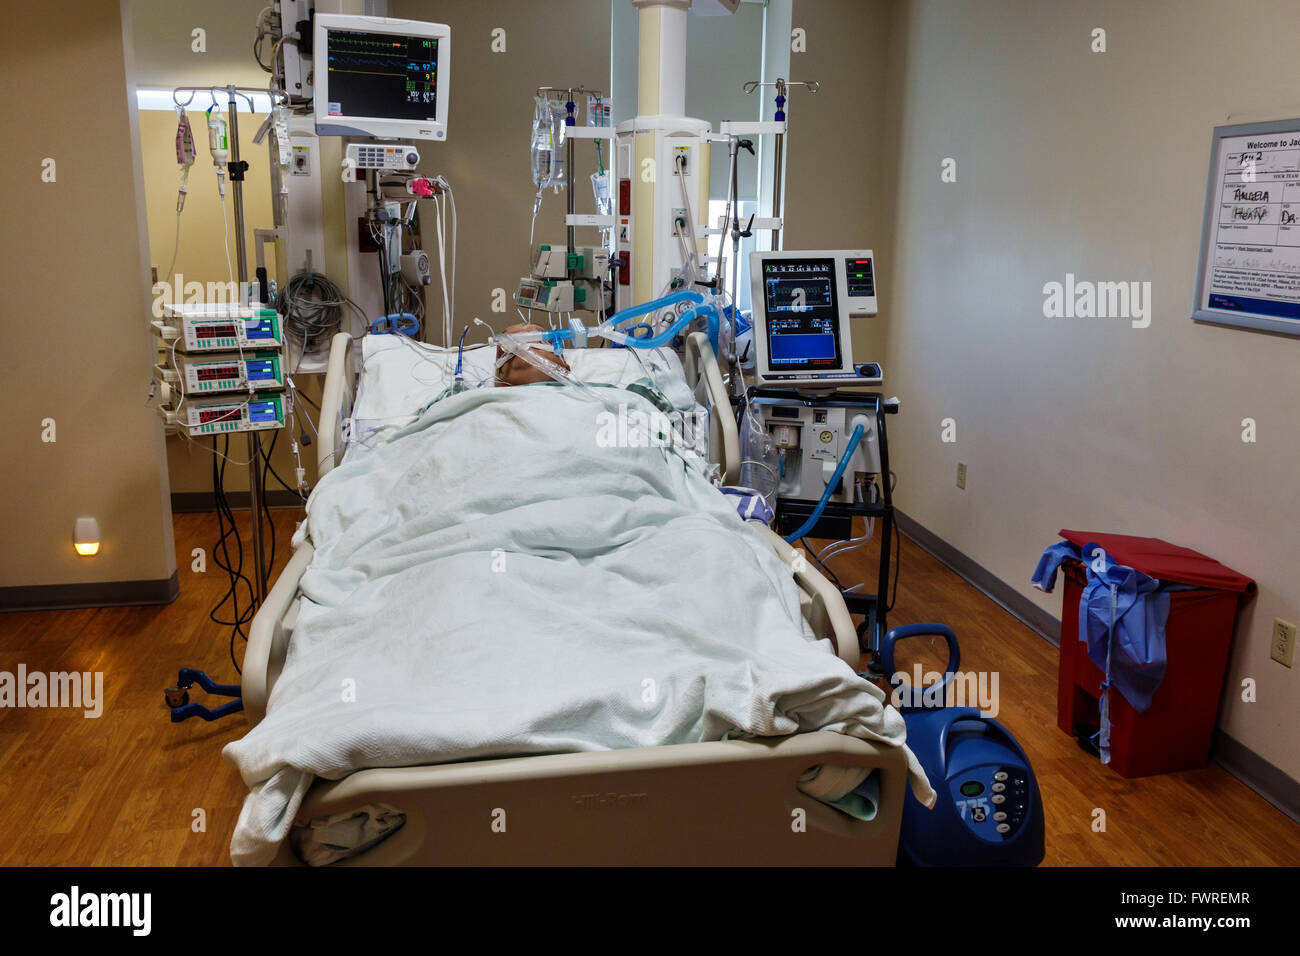 Female Patient Sleeping In Hospital Bed, Health Problem 